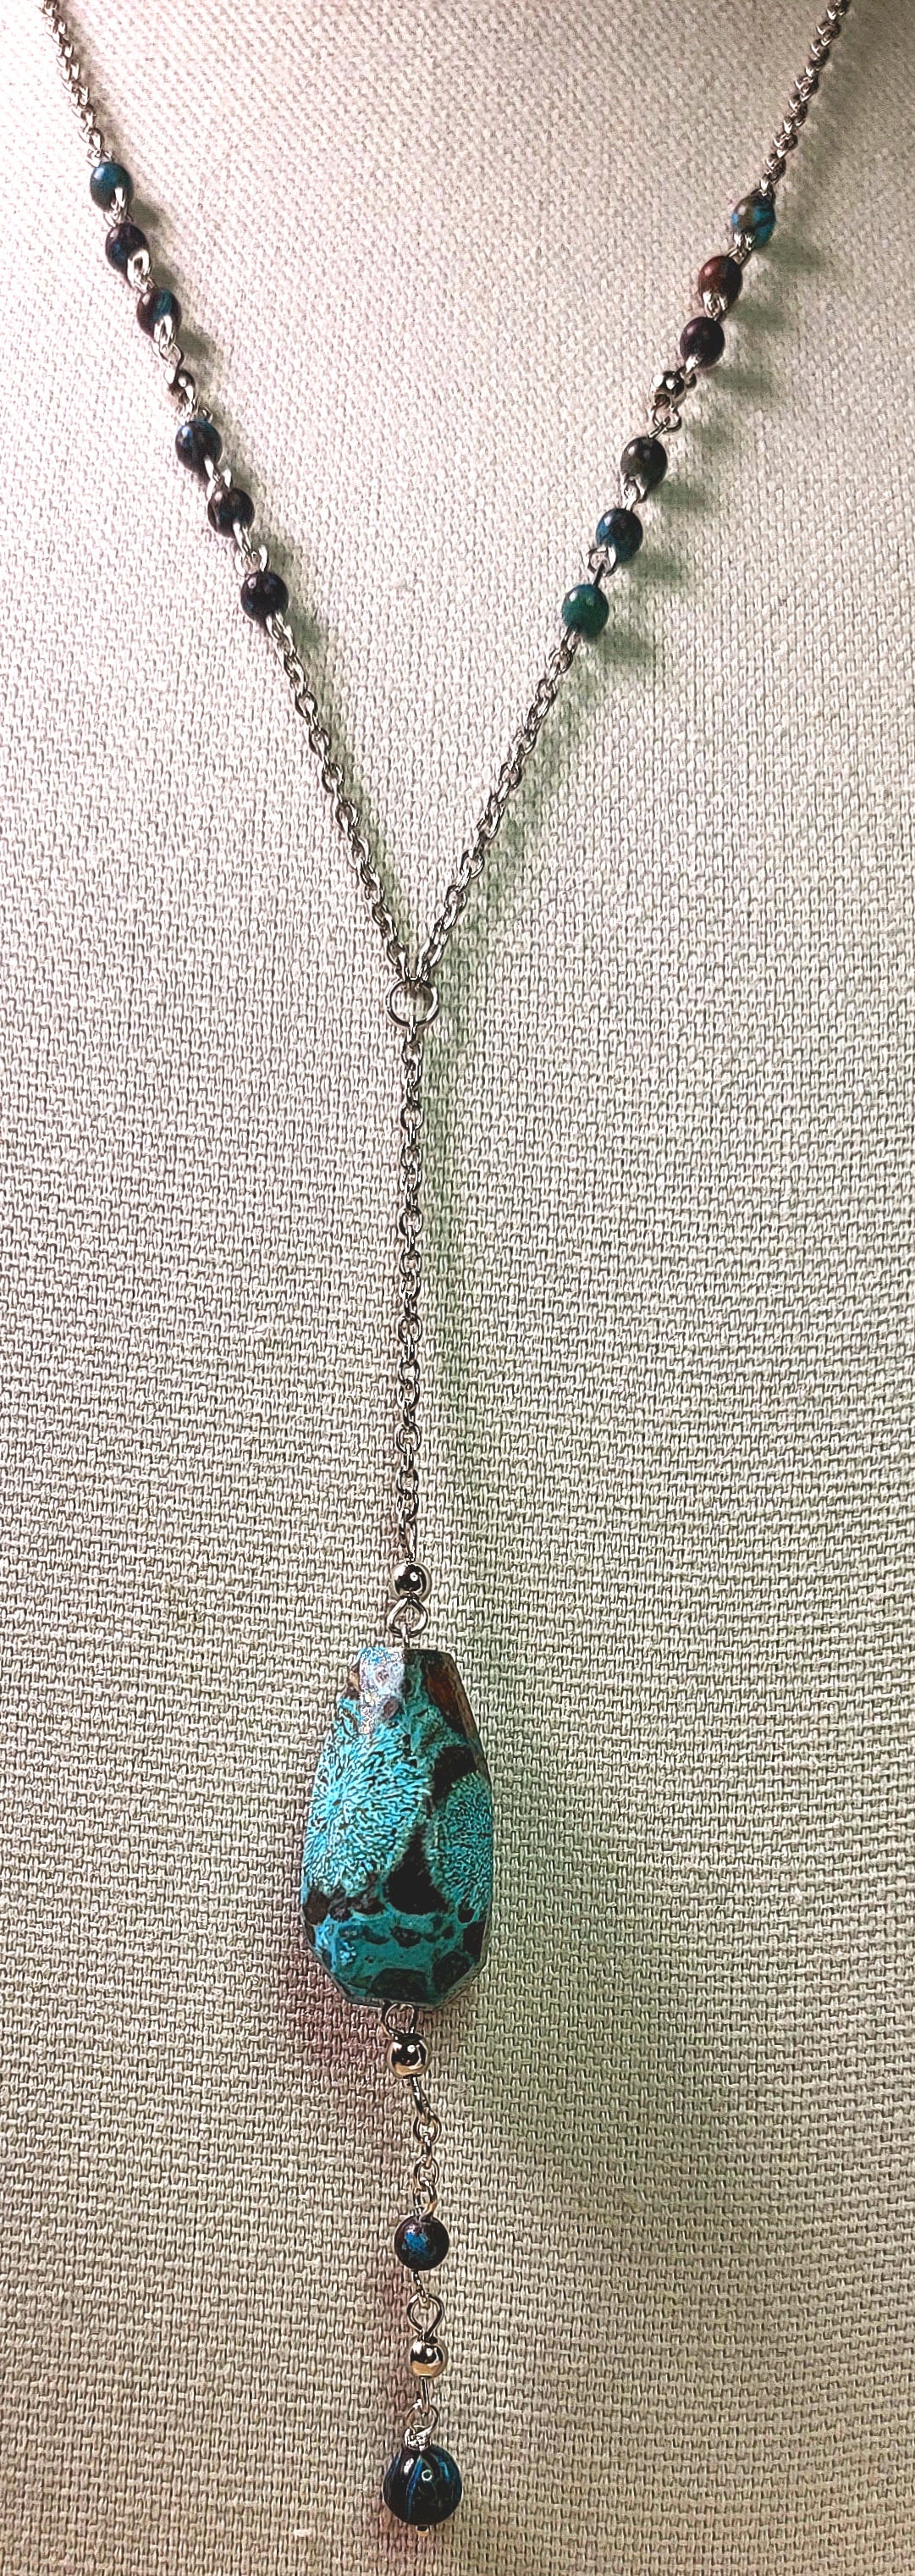 Necklace- Turquoise and silver beads with silver chain and adjustable length metal clasp